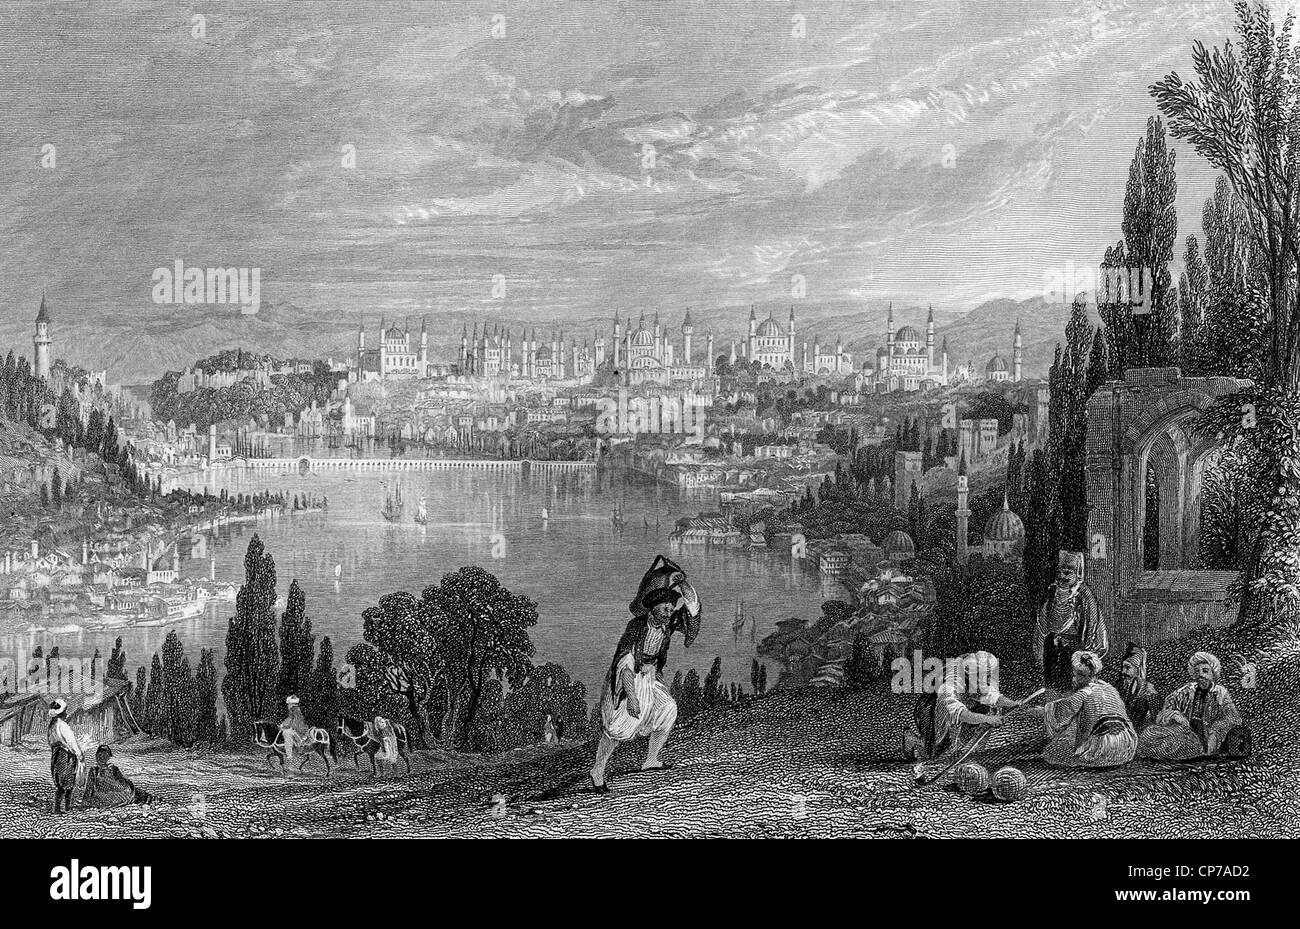 View of ancient Constantinople, modern day Istanbul, Turkey. Engraved by William Miller in 1847. Stock Photo